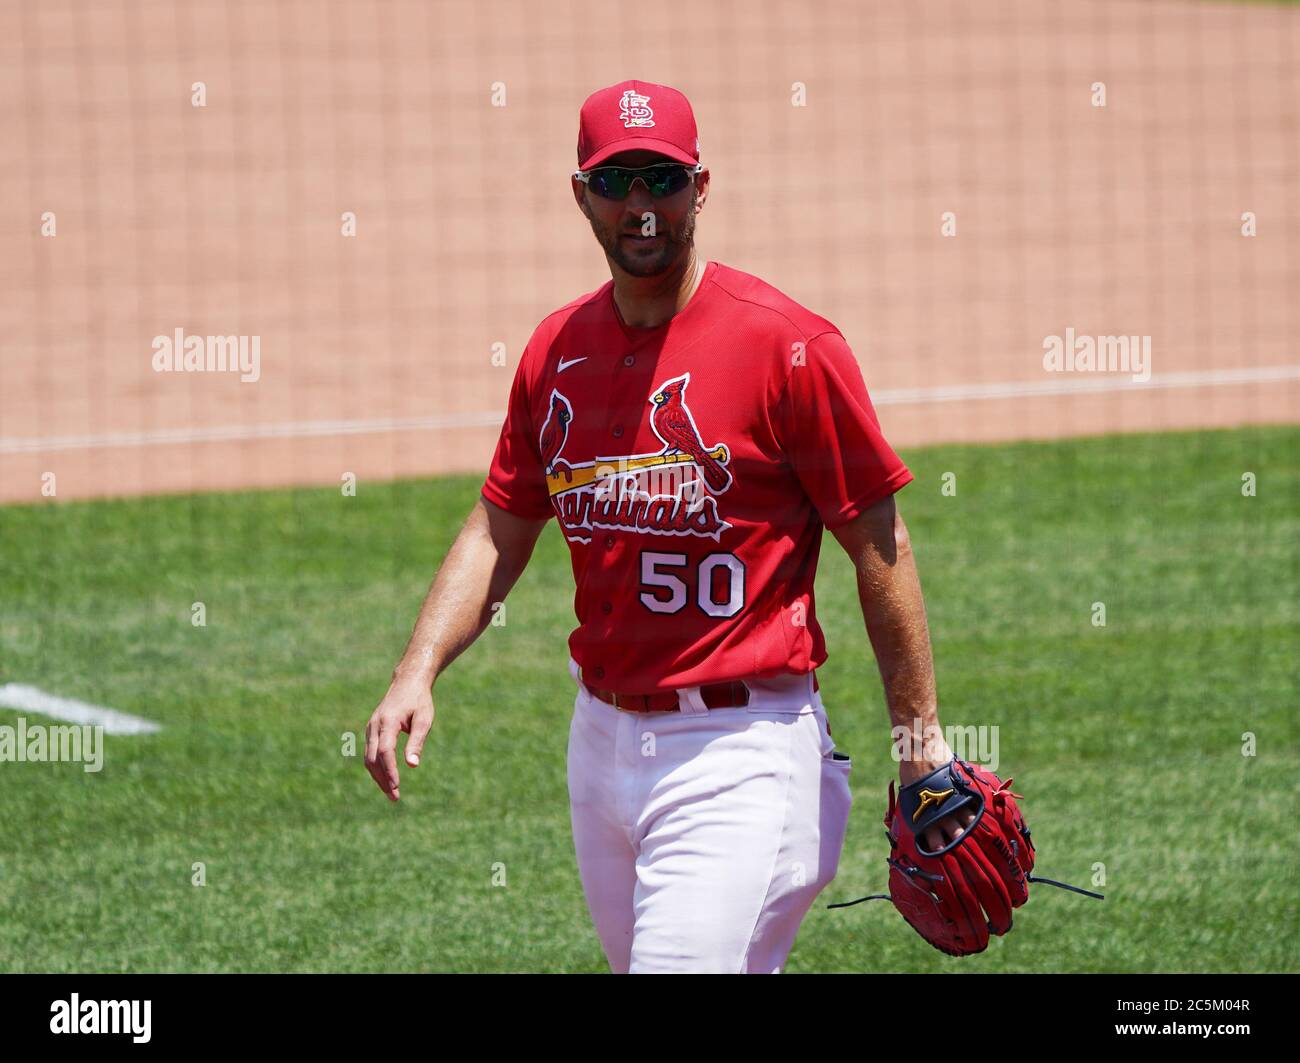 St. Louis, United States. 03rd July, 2020. St. Louis Cardinals pitcher Adam Wainwright walks in from the bullpen during batting practice at the team's first spring training workout at Busch Stadium in St. Louis on Friday, July 3, 2020. Major League Baseball is starting their 2020 season after the COVID-19 pandemic caused months of delays. Photo by Bill Greenblatt/UPI Credit: UPI/Alamy Live News Stock Photo